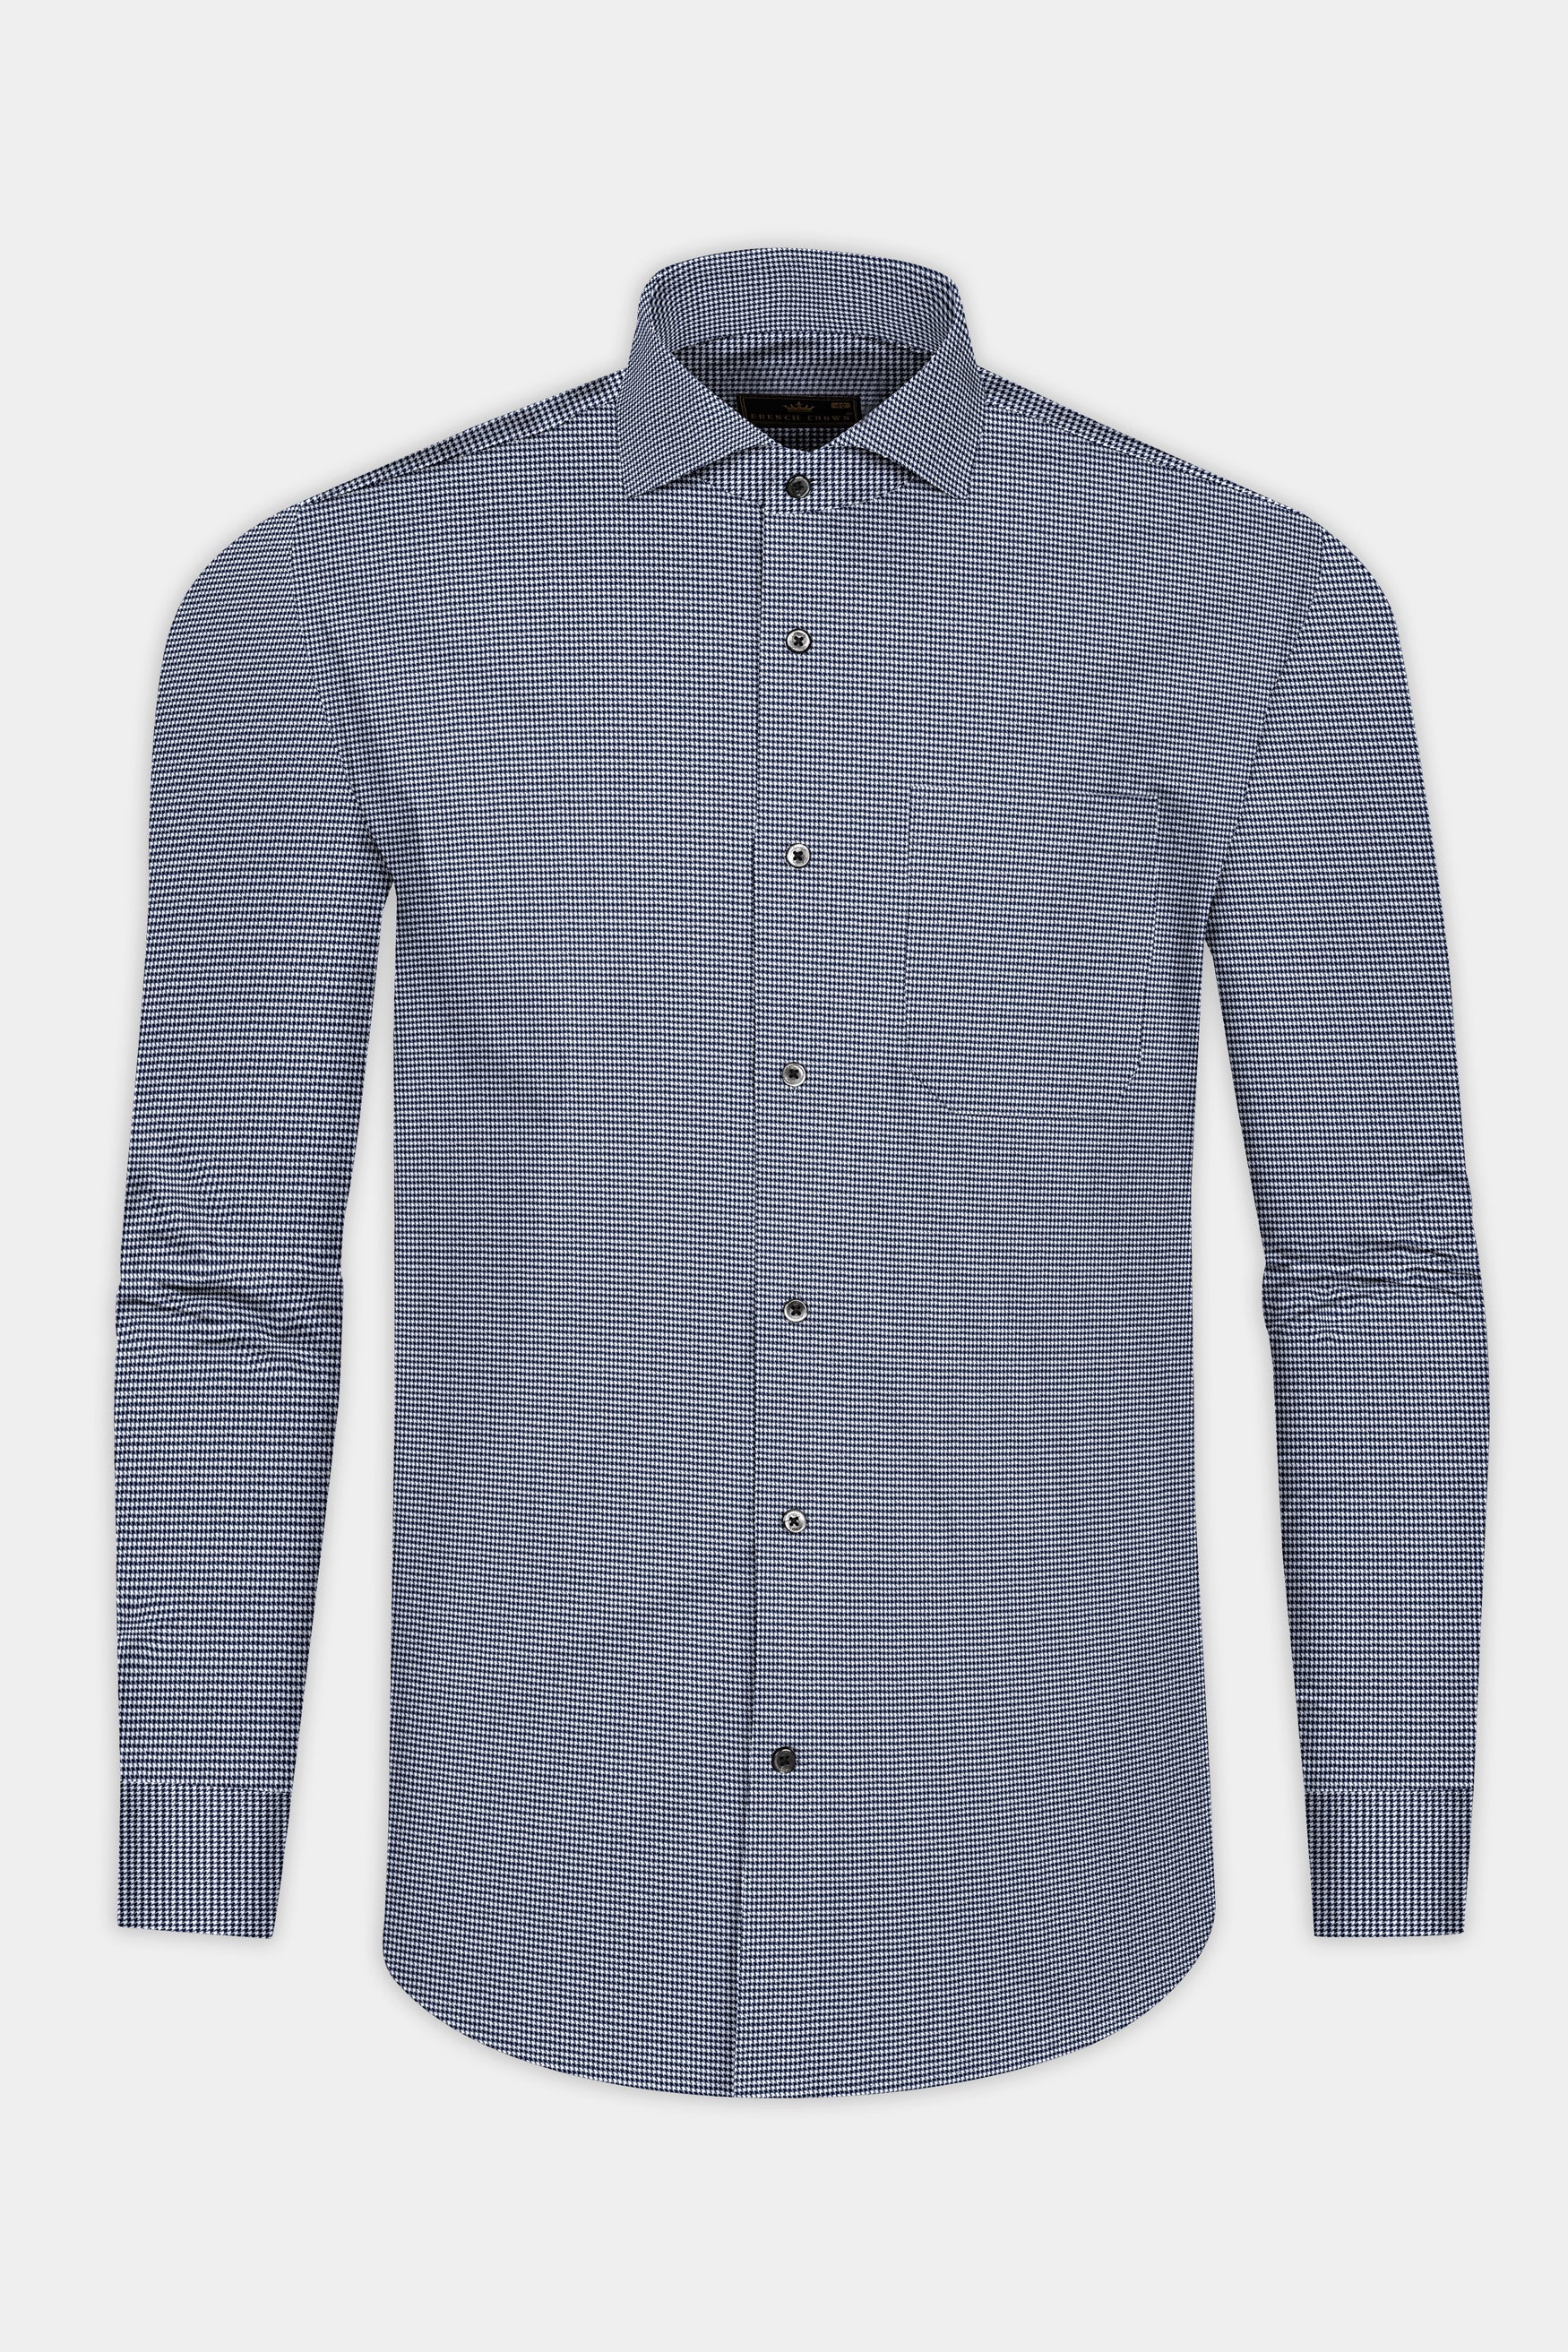 Mirage Blue with White Mini checkered Houndstooth Shirt